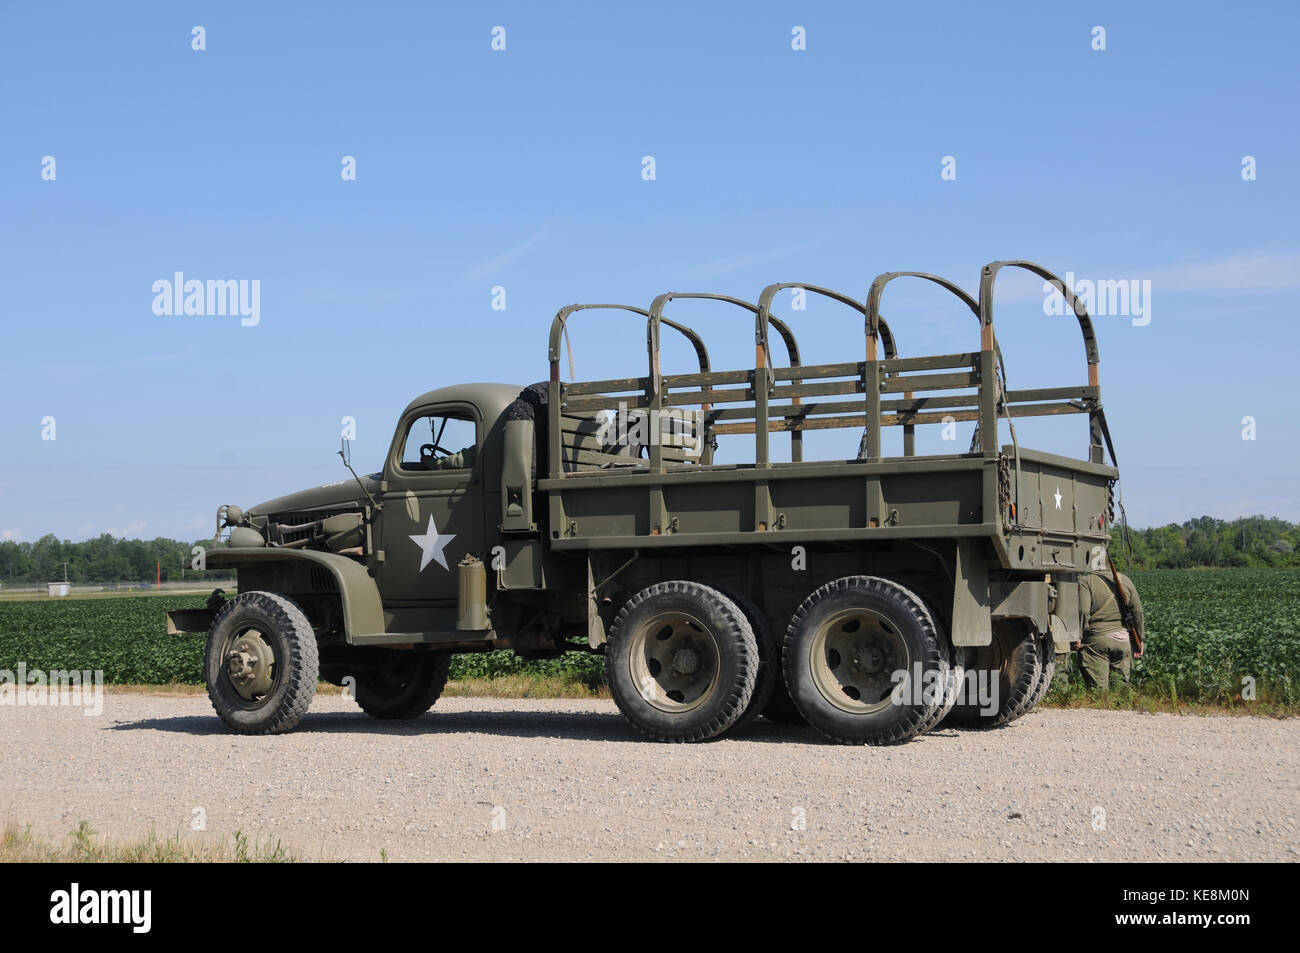 World War II era military truck on a country road Stock Photo